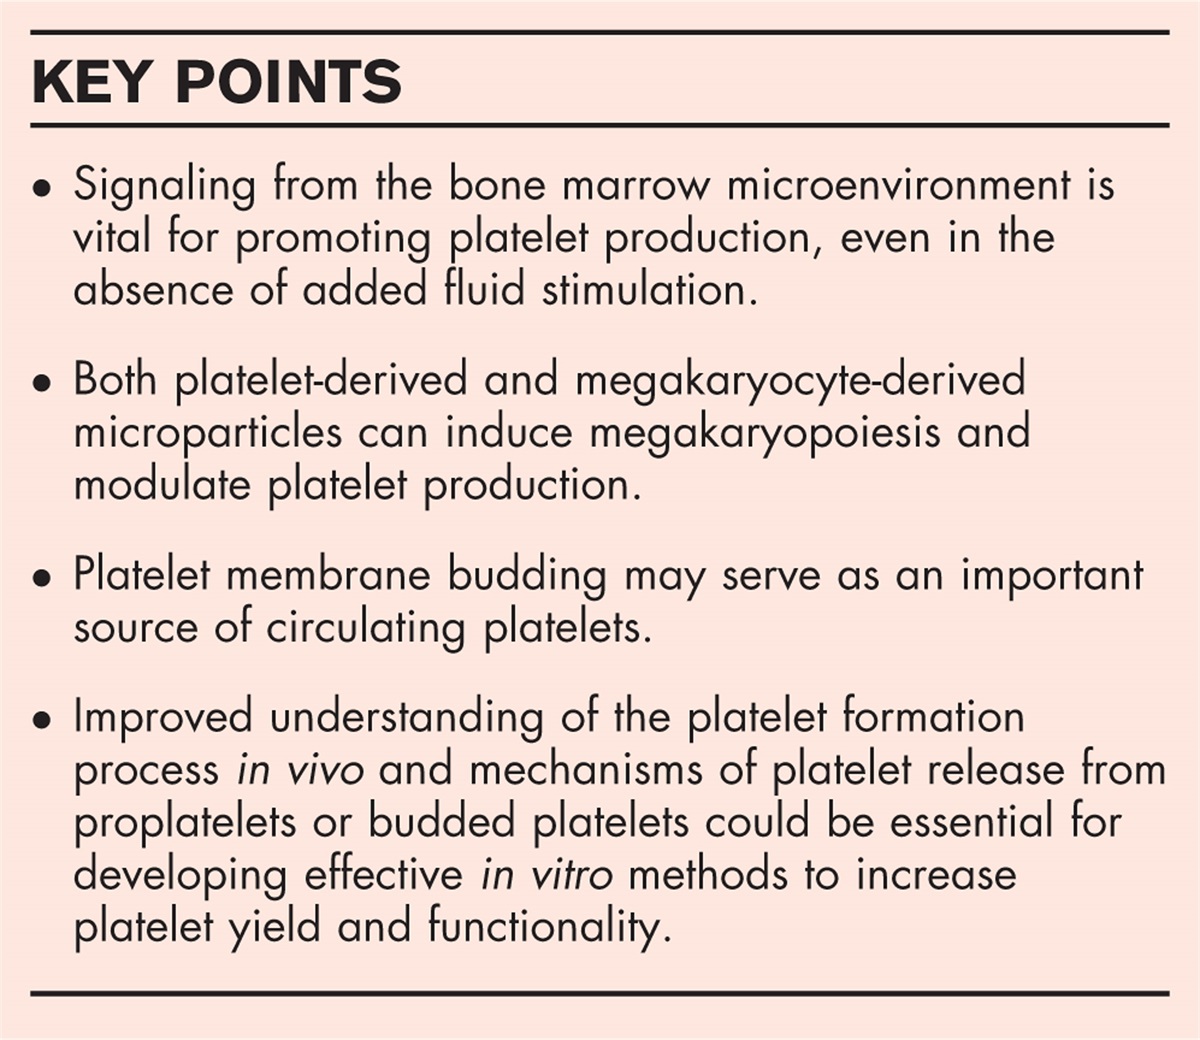 Recent lessons learned for ex-vivo platelet production